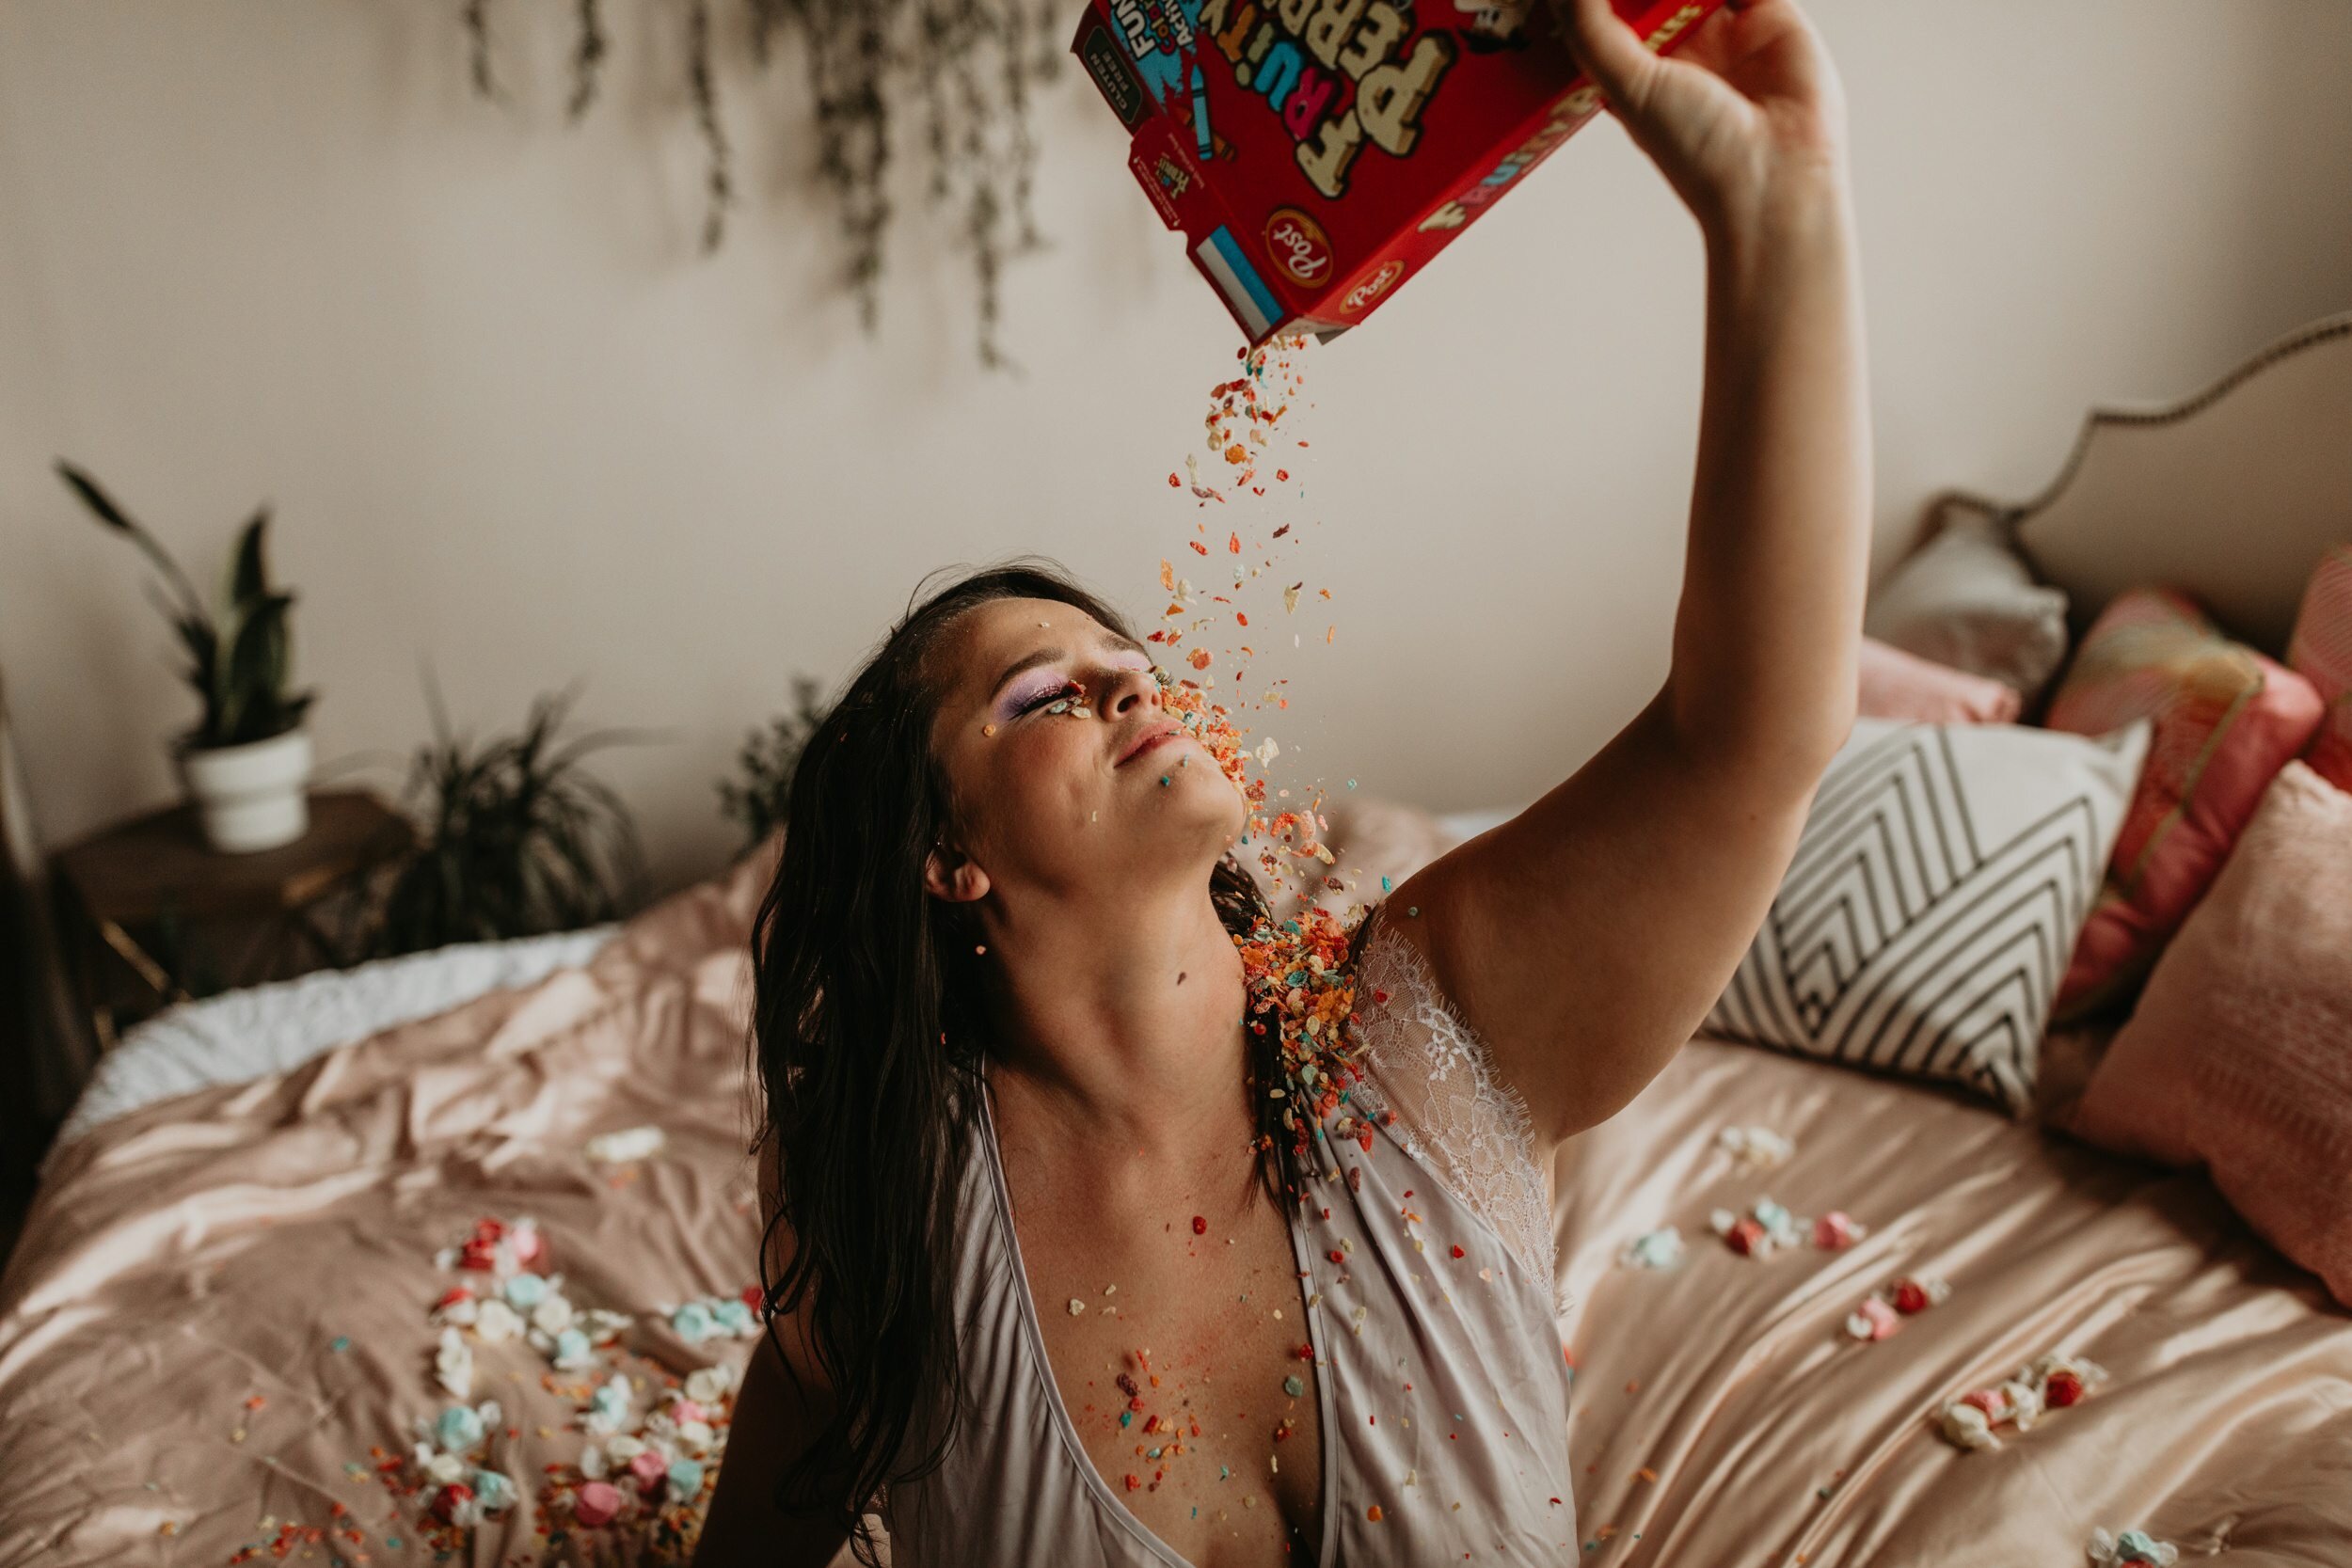 Boudoir-Portraits-with-Ice-Cream-Gummy-Candy-Red-Licorice-Cereal-0021.JPG